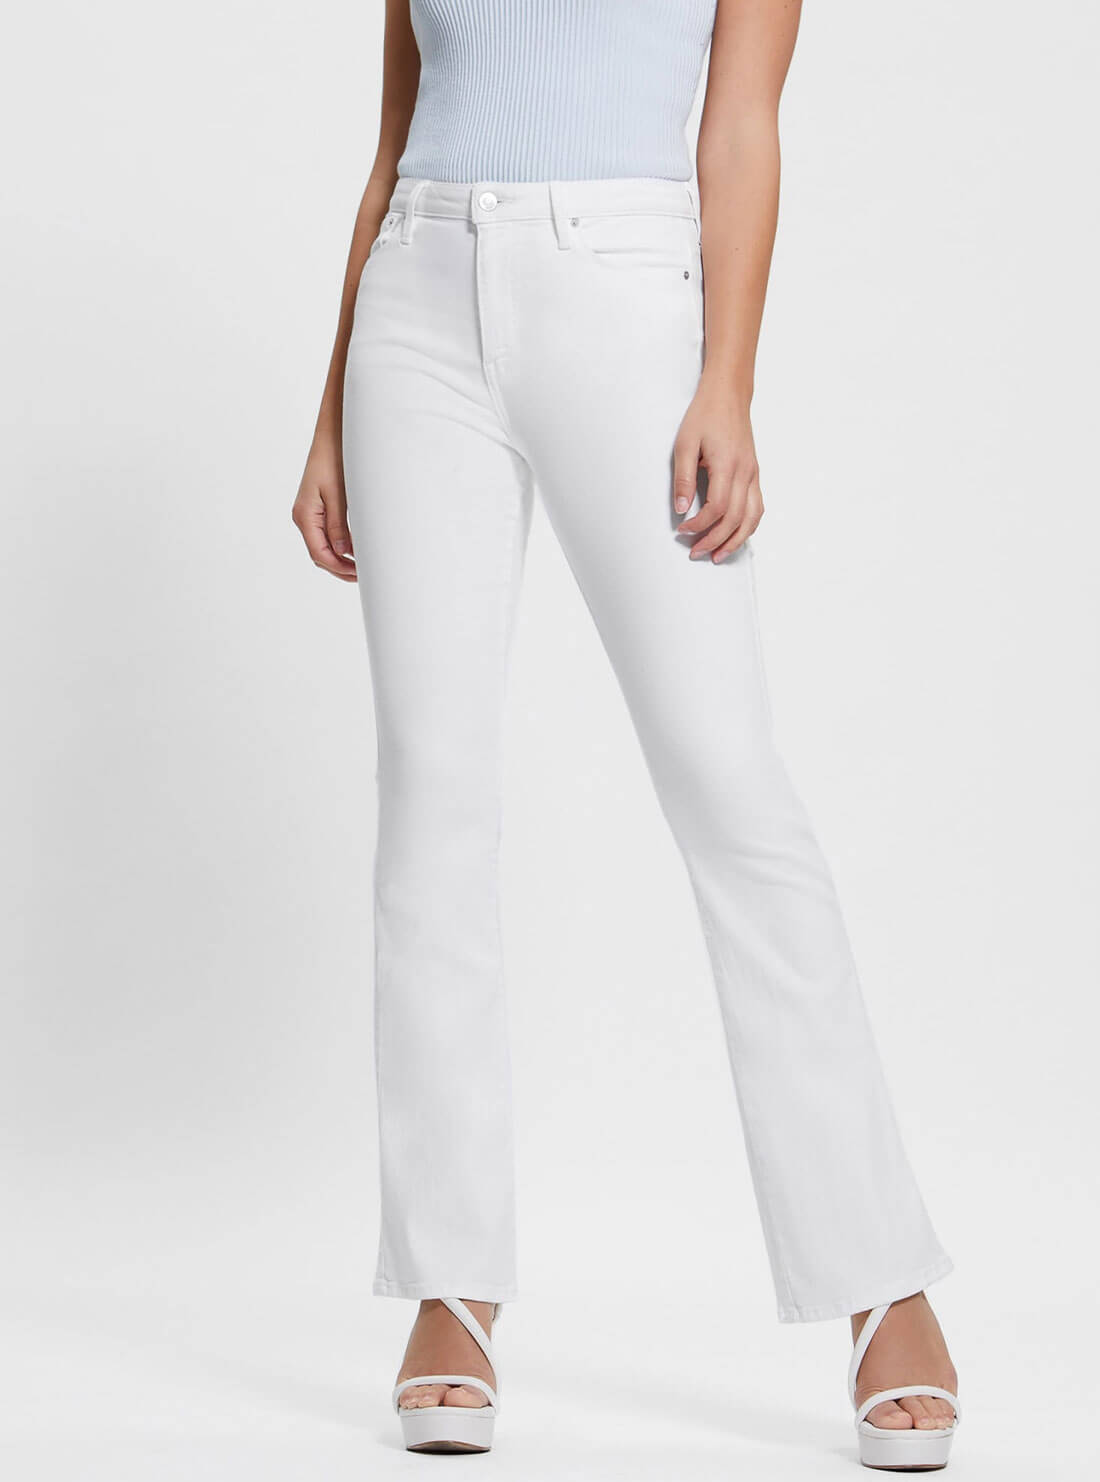  High-Rise Sexy Flare Leg Denim Jeans In Clean White Wash | GUESS Women's Denim | front view